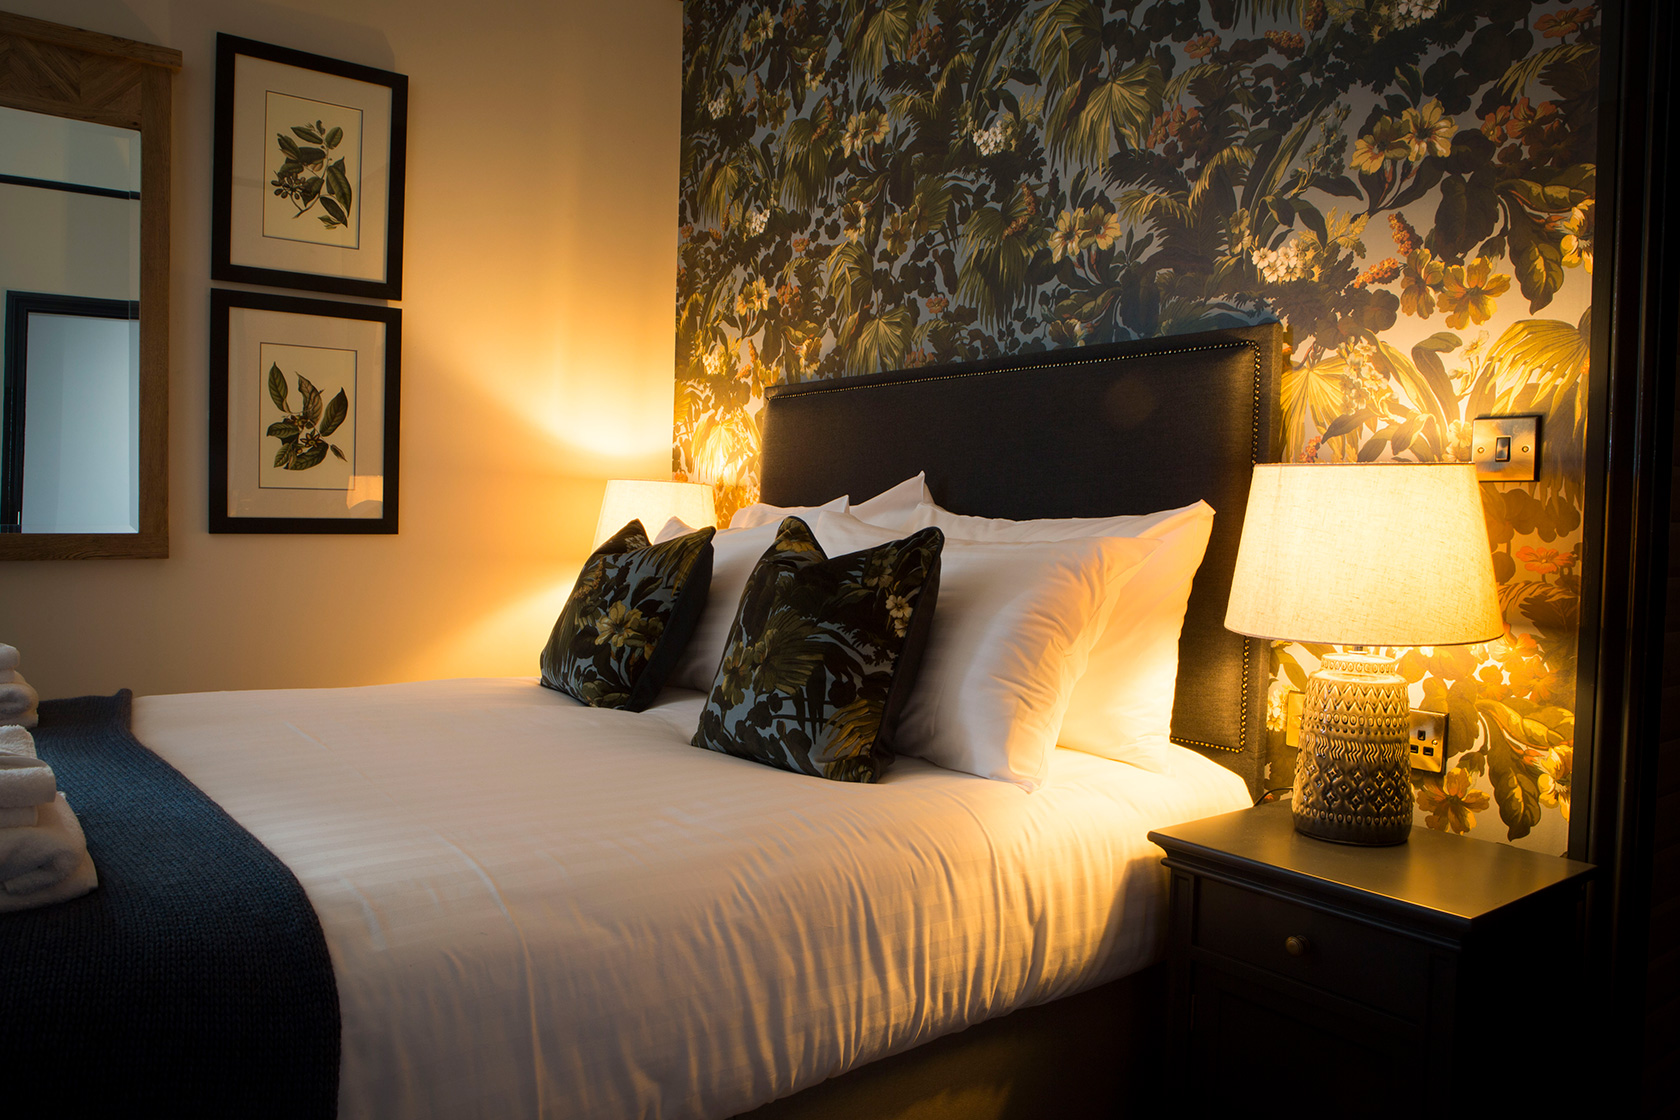 Our dog-friendly double hotel rooms offer a cosy nights stay with comfortable beds for those travelling on a lighter budget